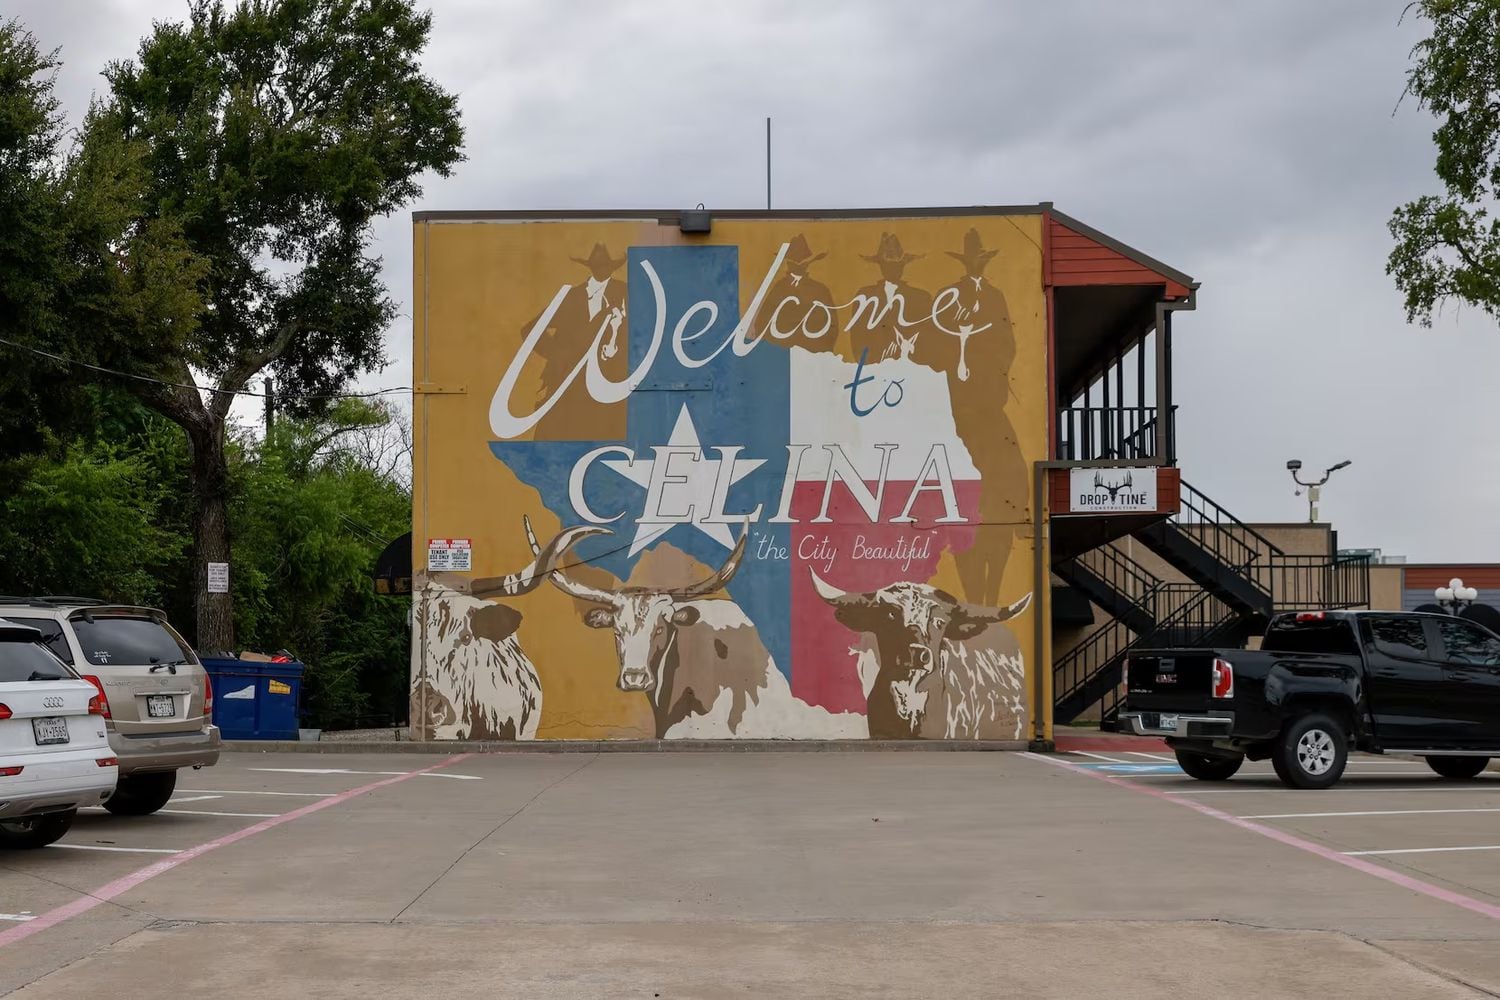 Celina is one of the fastest-growing communities in North Texas.